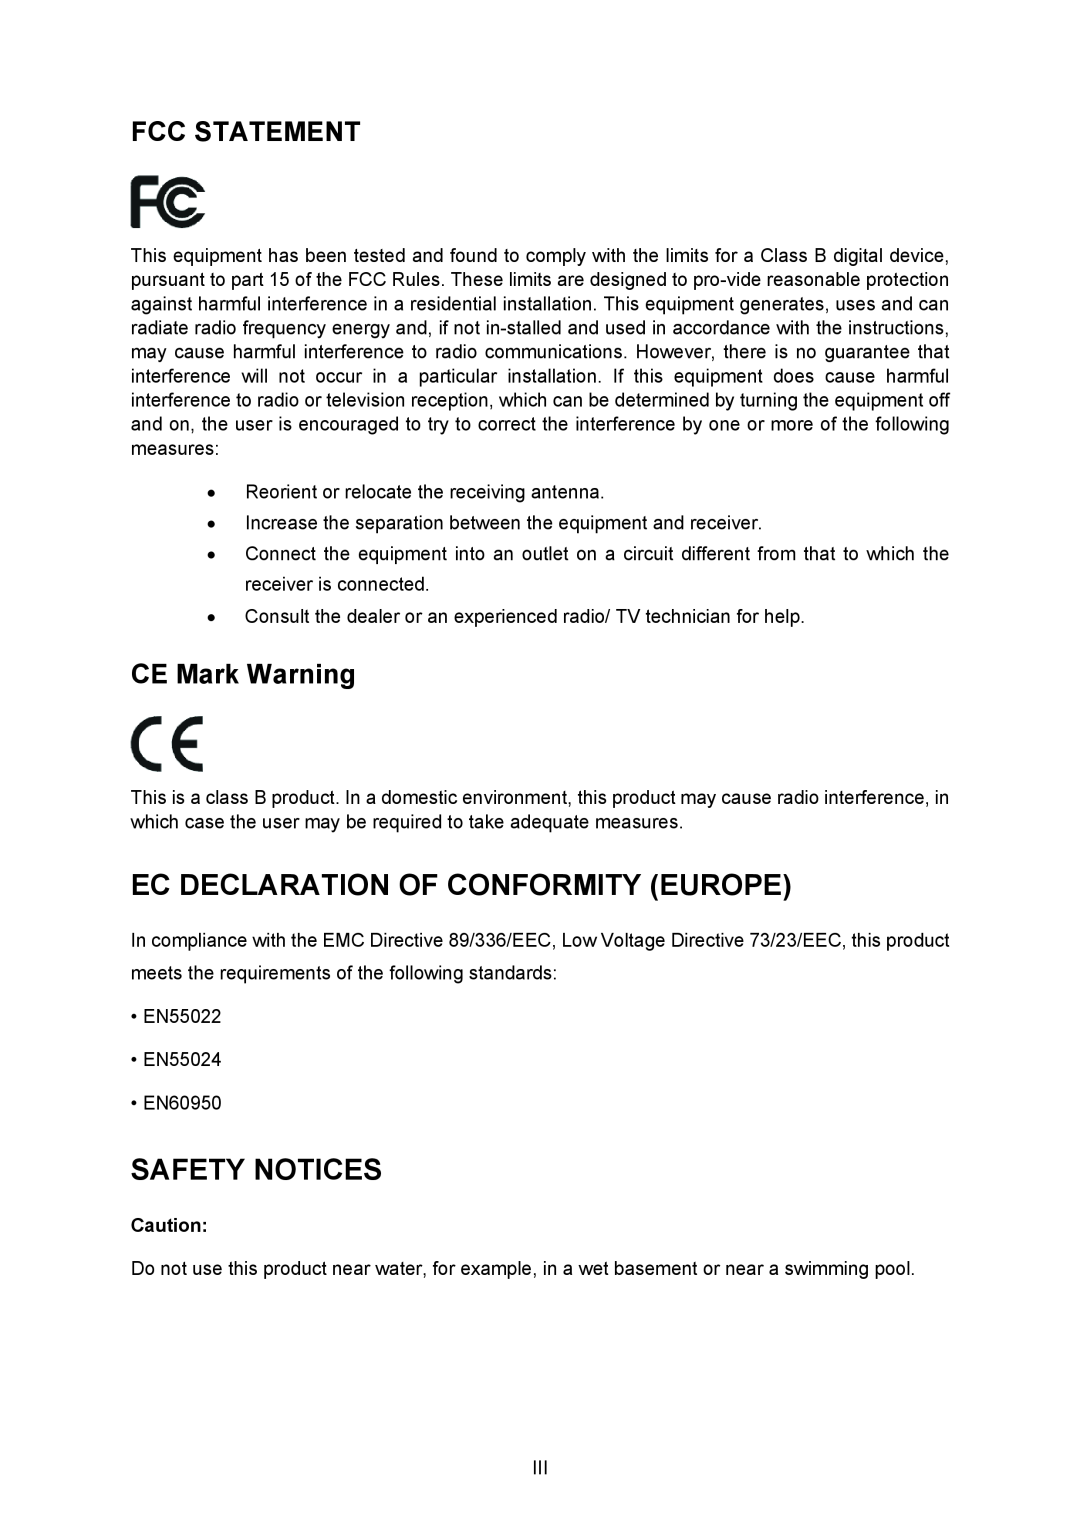 TP-Link TD-8810B manual Fcc Statement, CE Mark Warning, Ec Declaration Of Conformity Europe, Safety Notices 